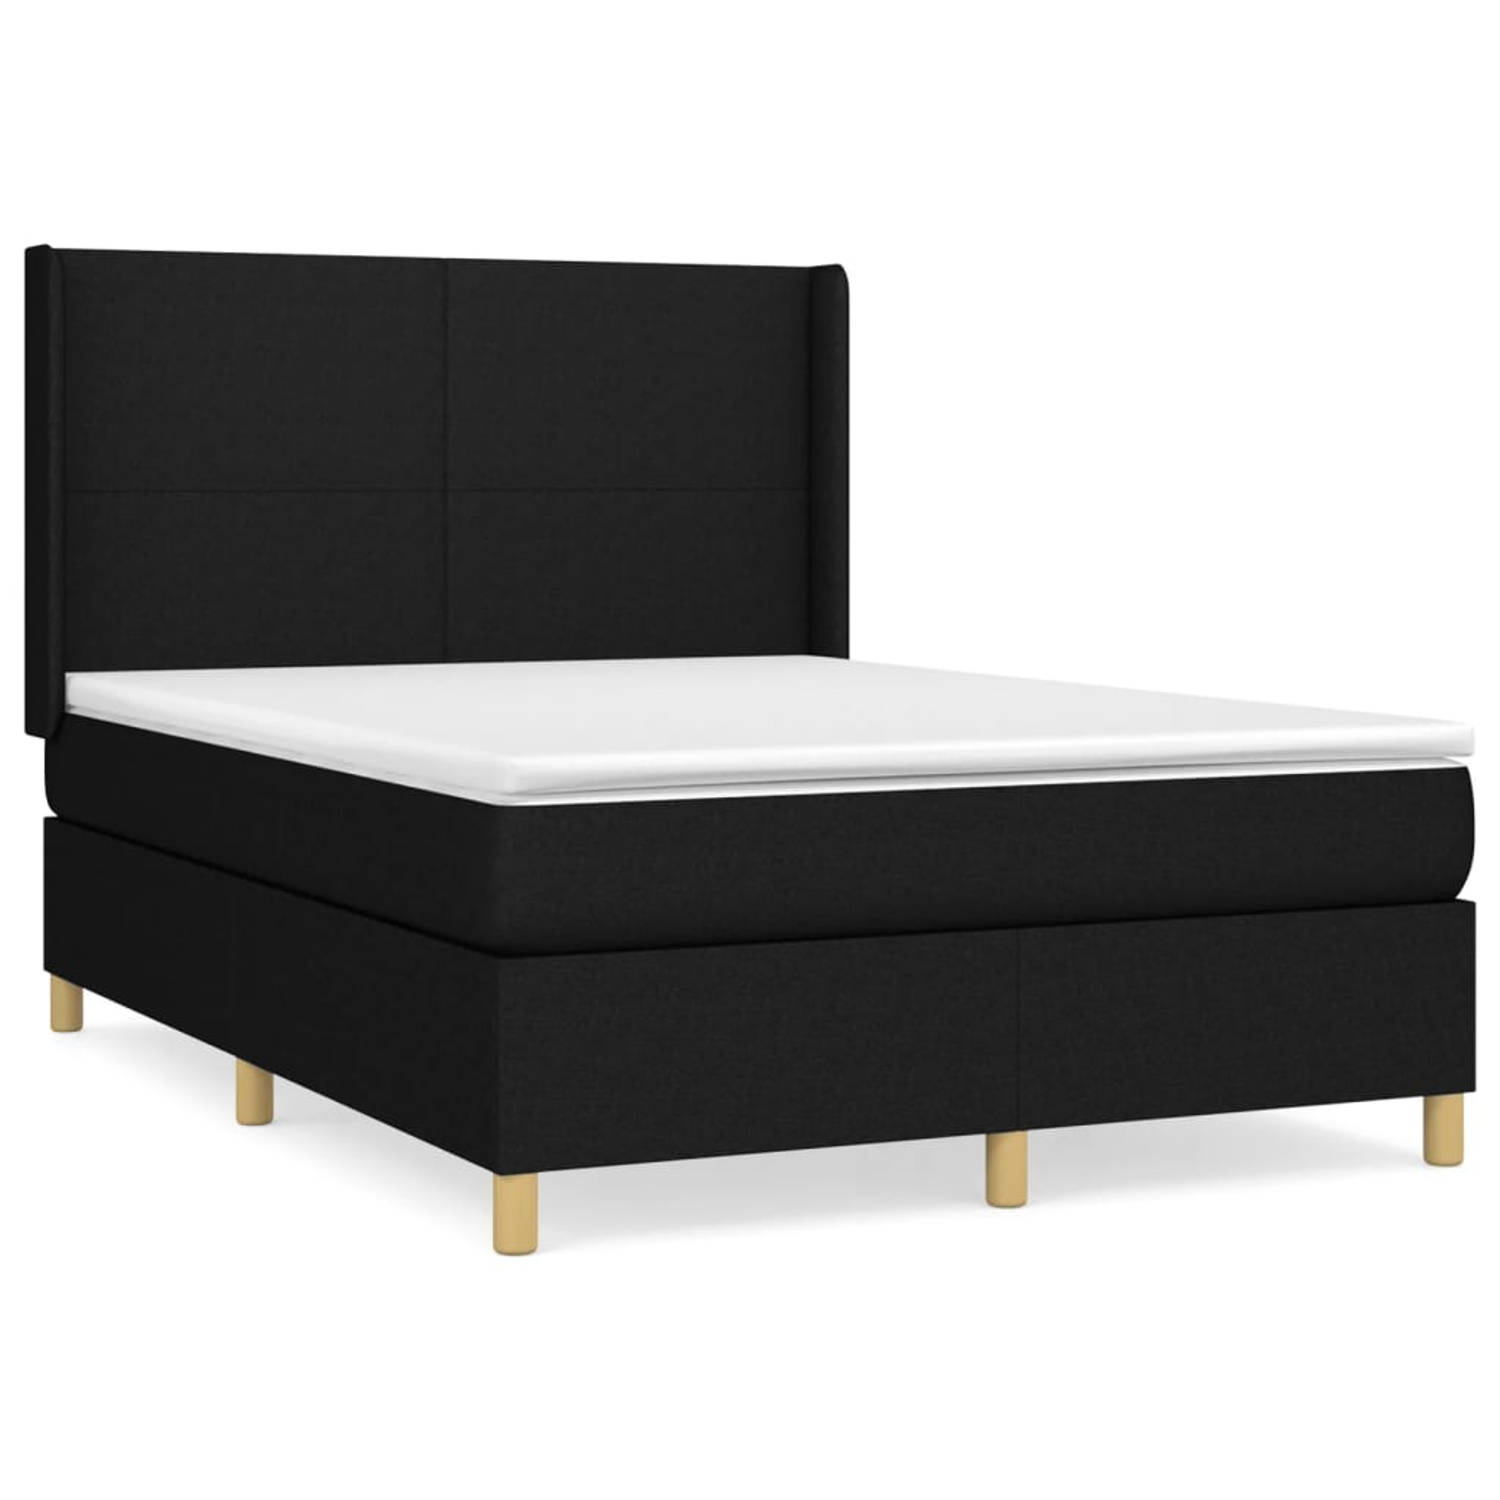 The Living Store Boxspringbed - naam - Bed - 203 x 147 x 118/128 cm - Zwart